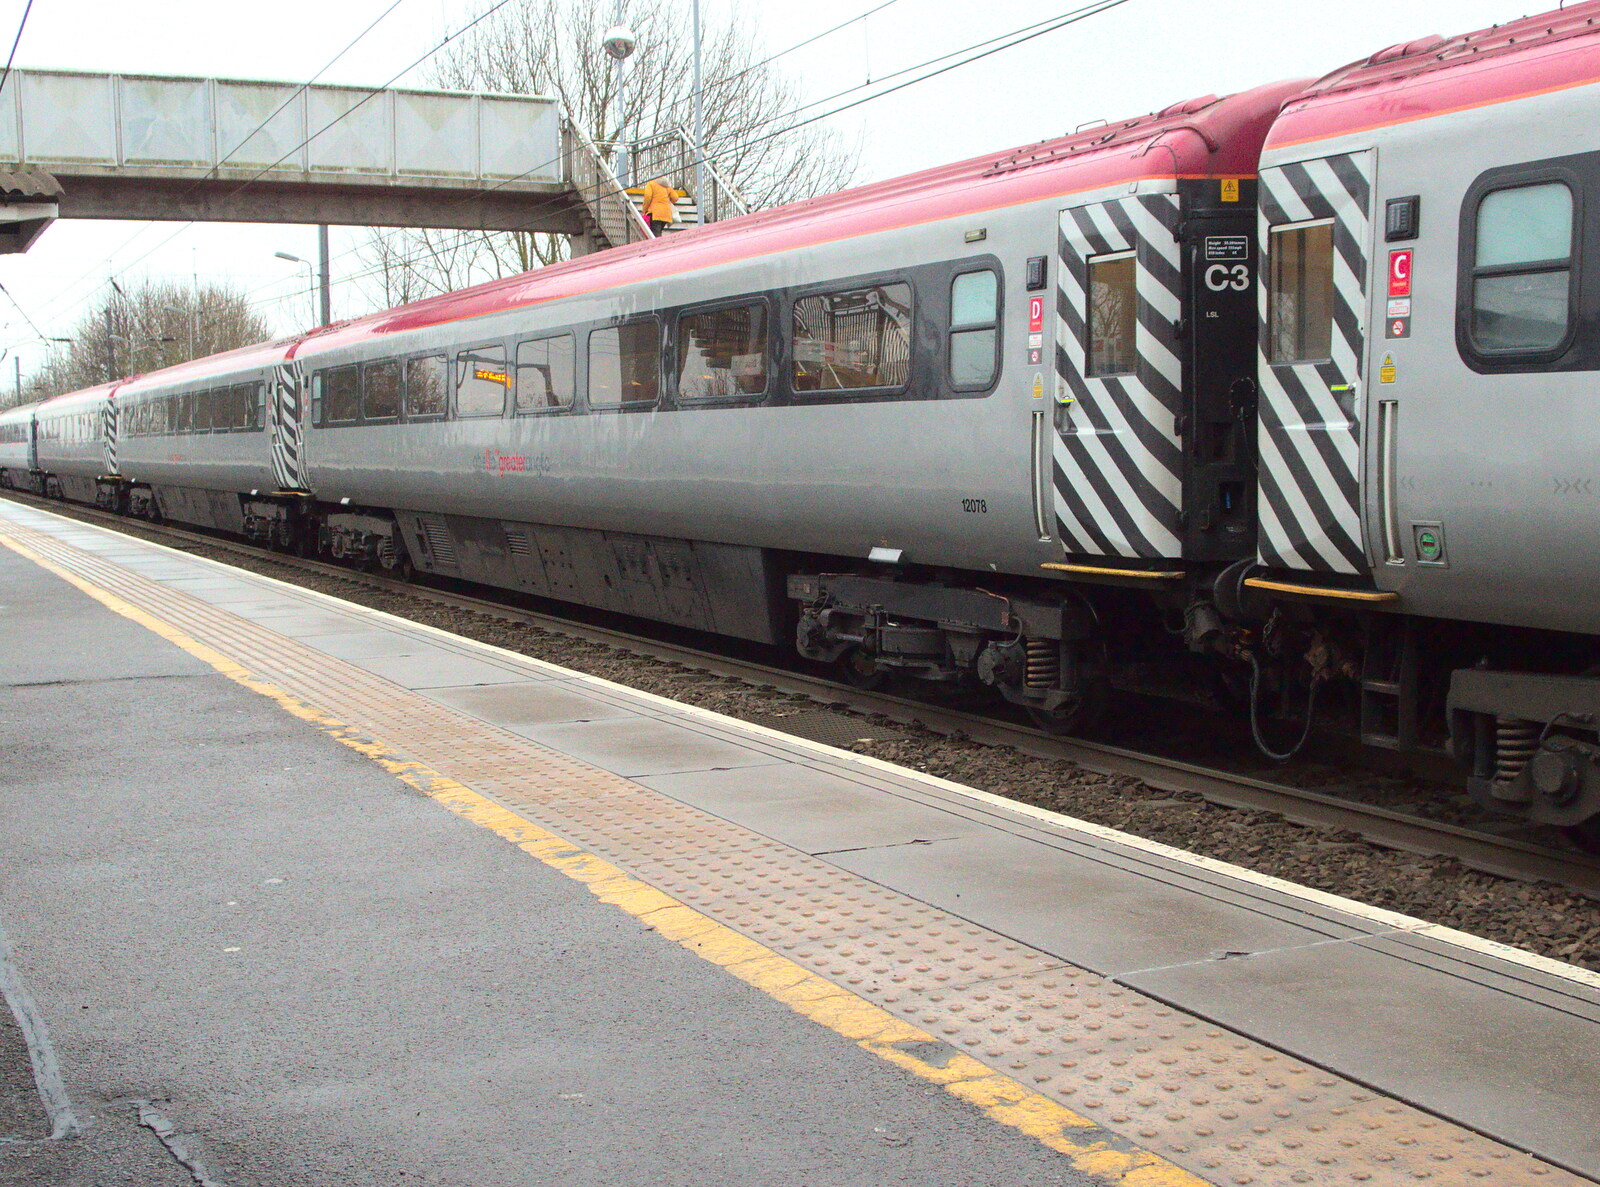 Greater Anglia's £1 million Pretendolino from Closing Down: A Late January Miscellany, Diss, Norfolk - 31st January 2015